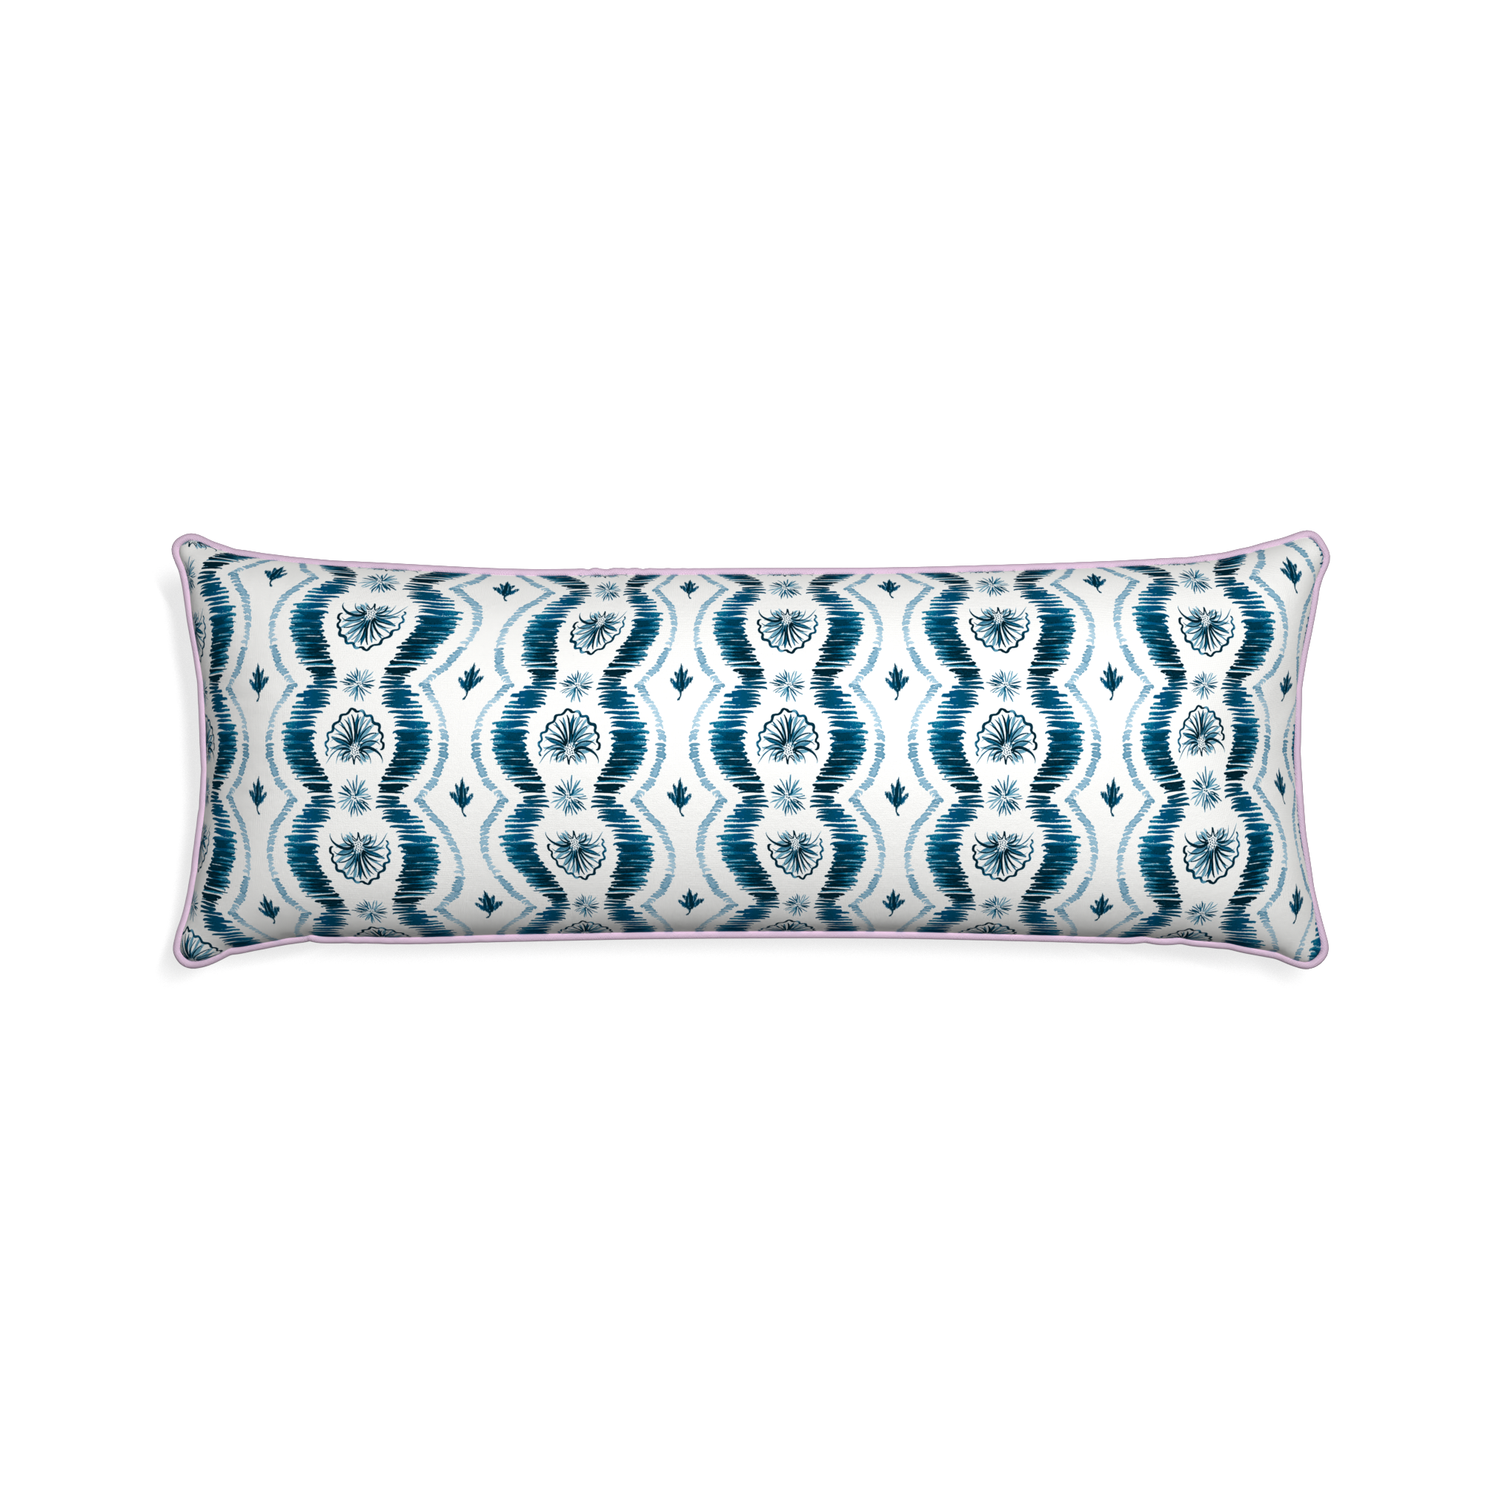 Xl-lumbar alice custom blue ikatpillow with l piping on white background